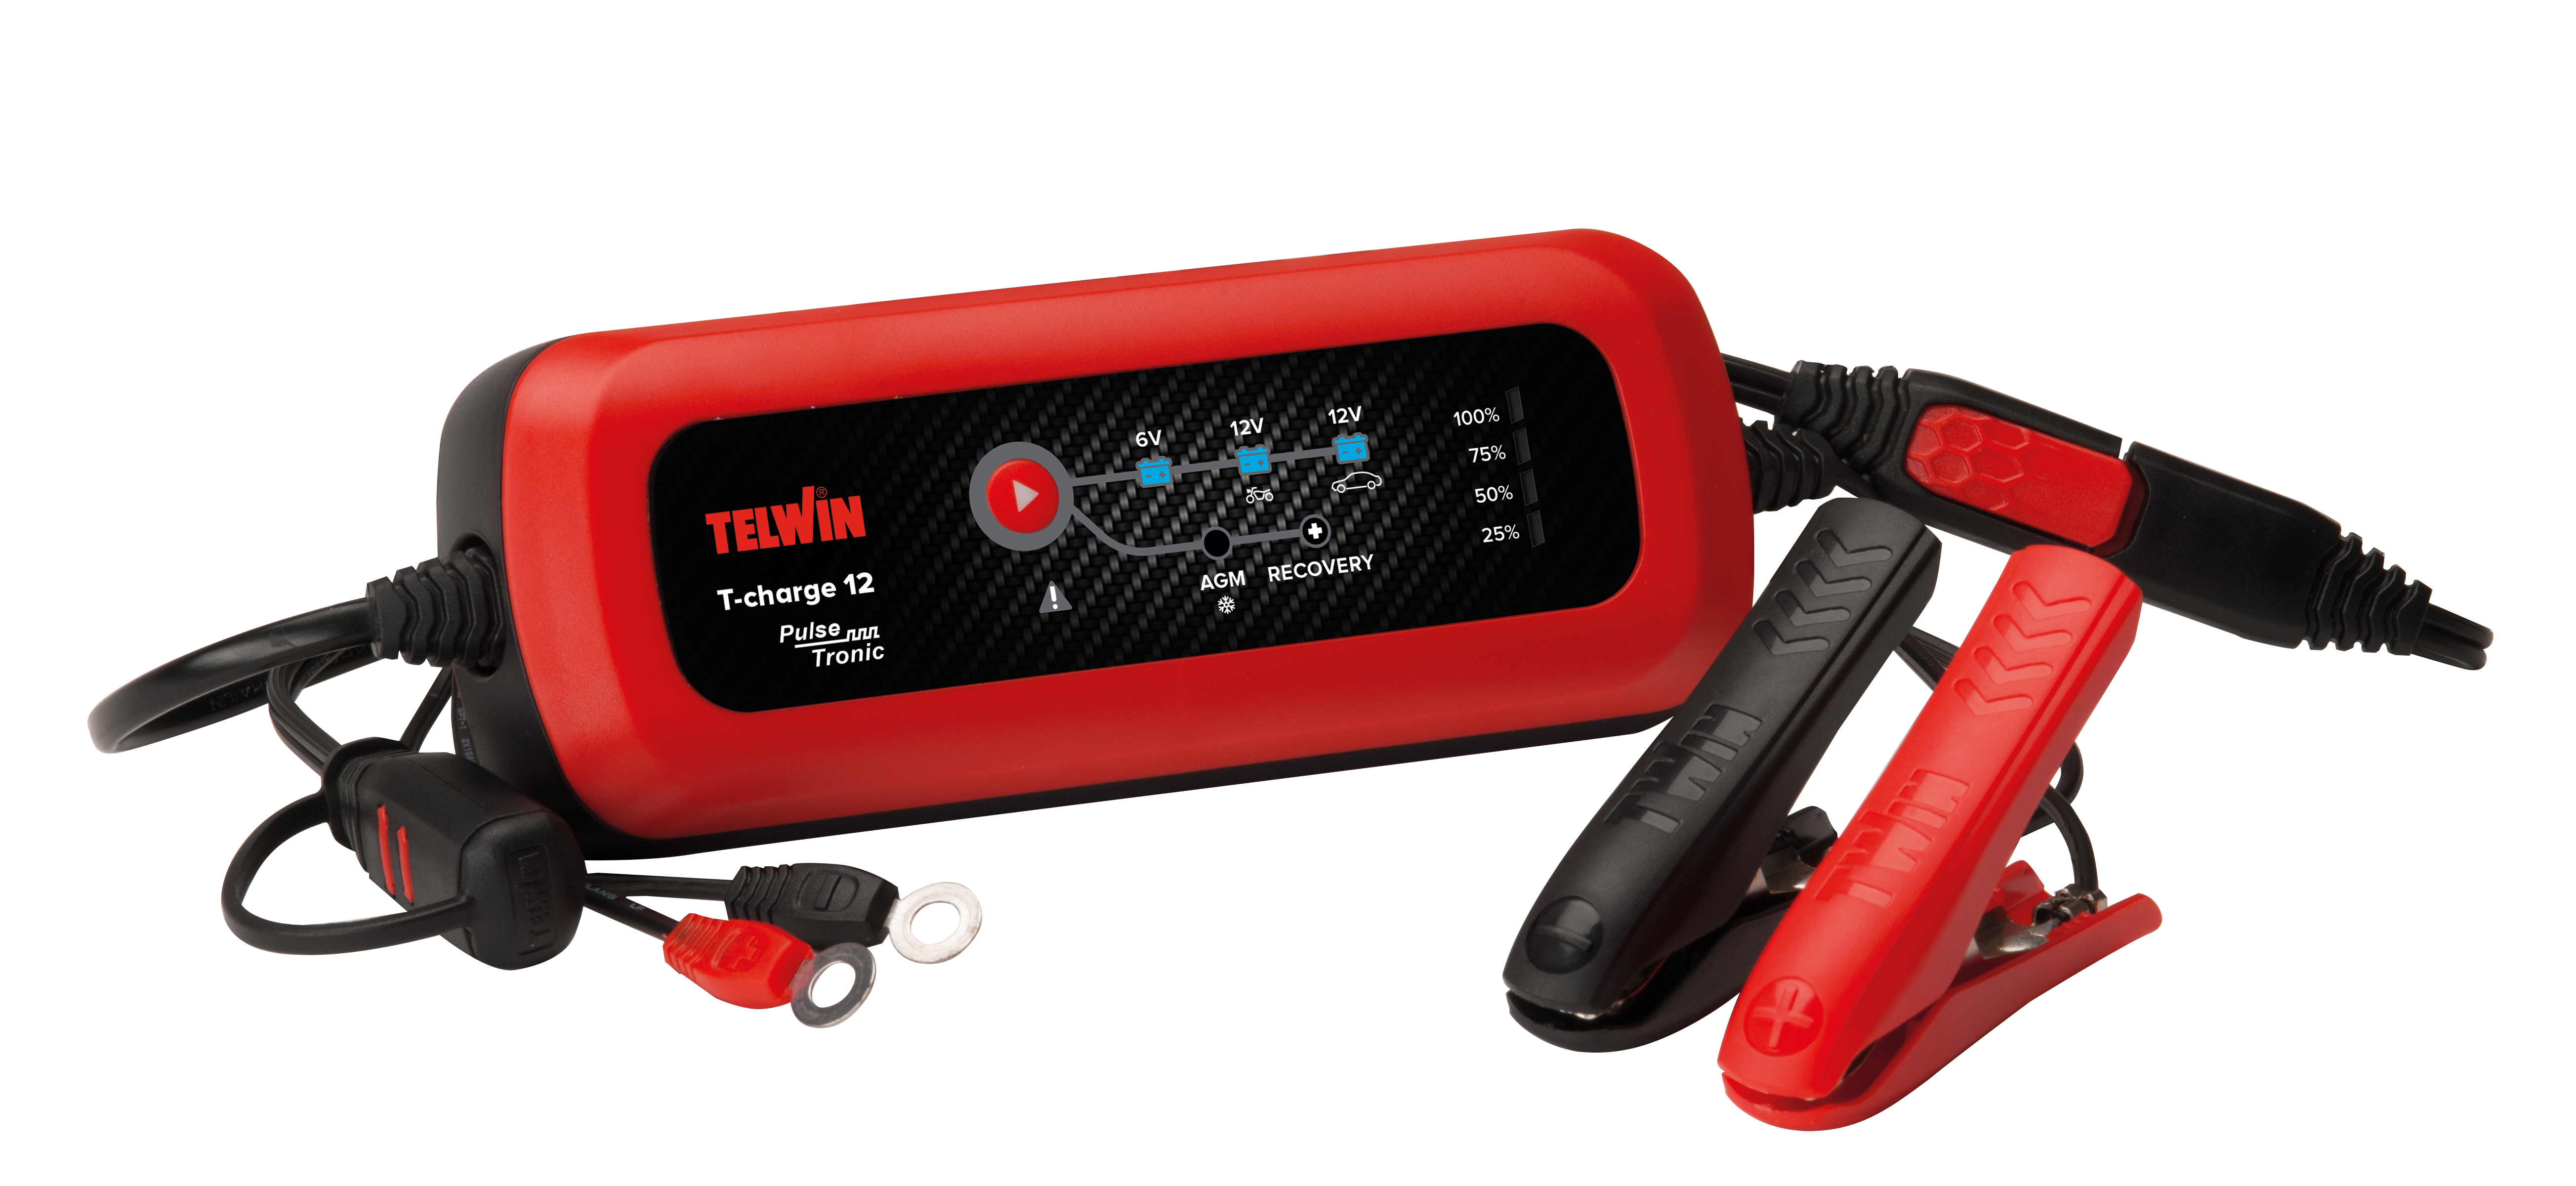 BATTERY - TELWIN Matthys T-CHARGE CHARGER 12 6V/12V